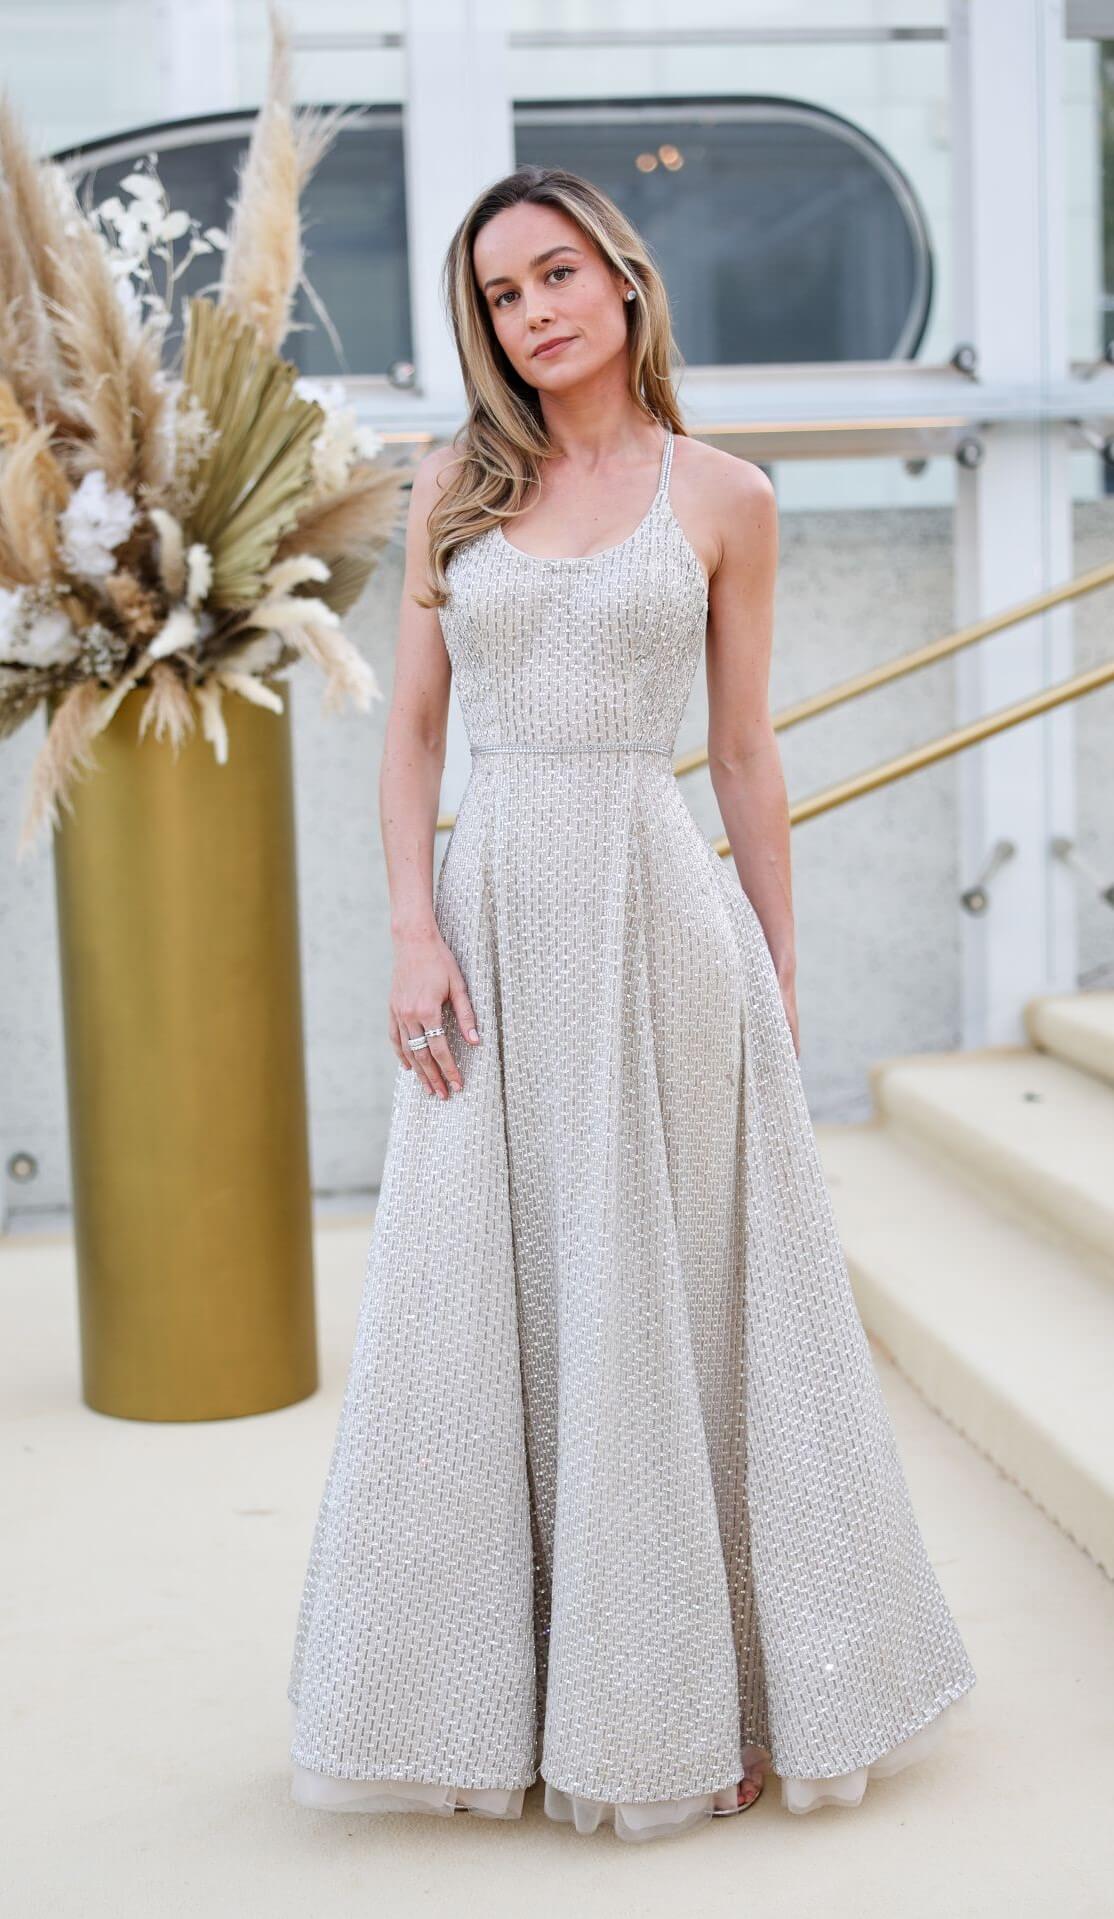 Brie Larson  In White Shiny Strap Sleeves Long Flare Gown At Gold House 2nd Annual Gold Gala: Gold Bridge in Los Angeles